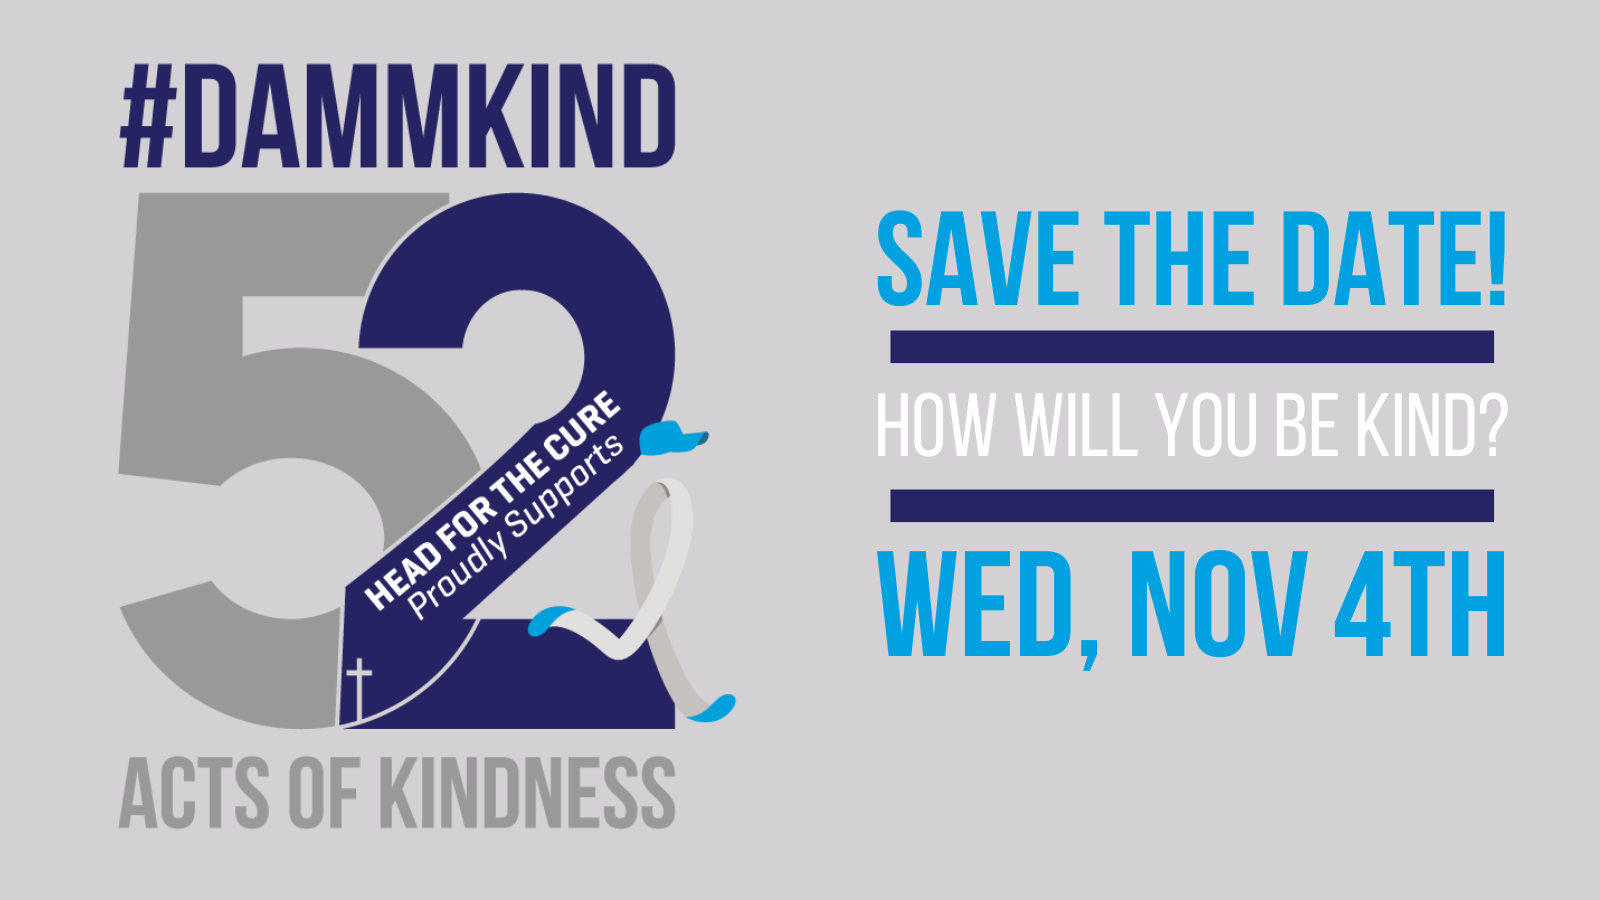 Acts of Kindness is November 4th!